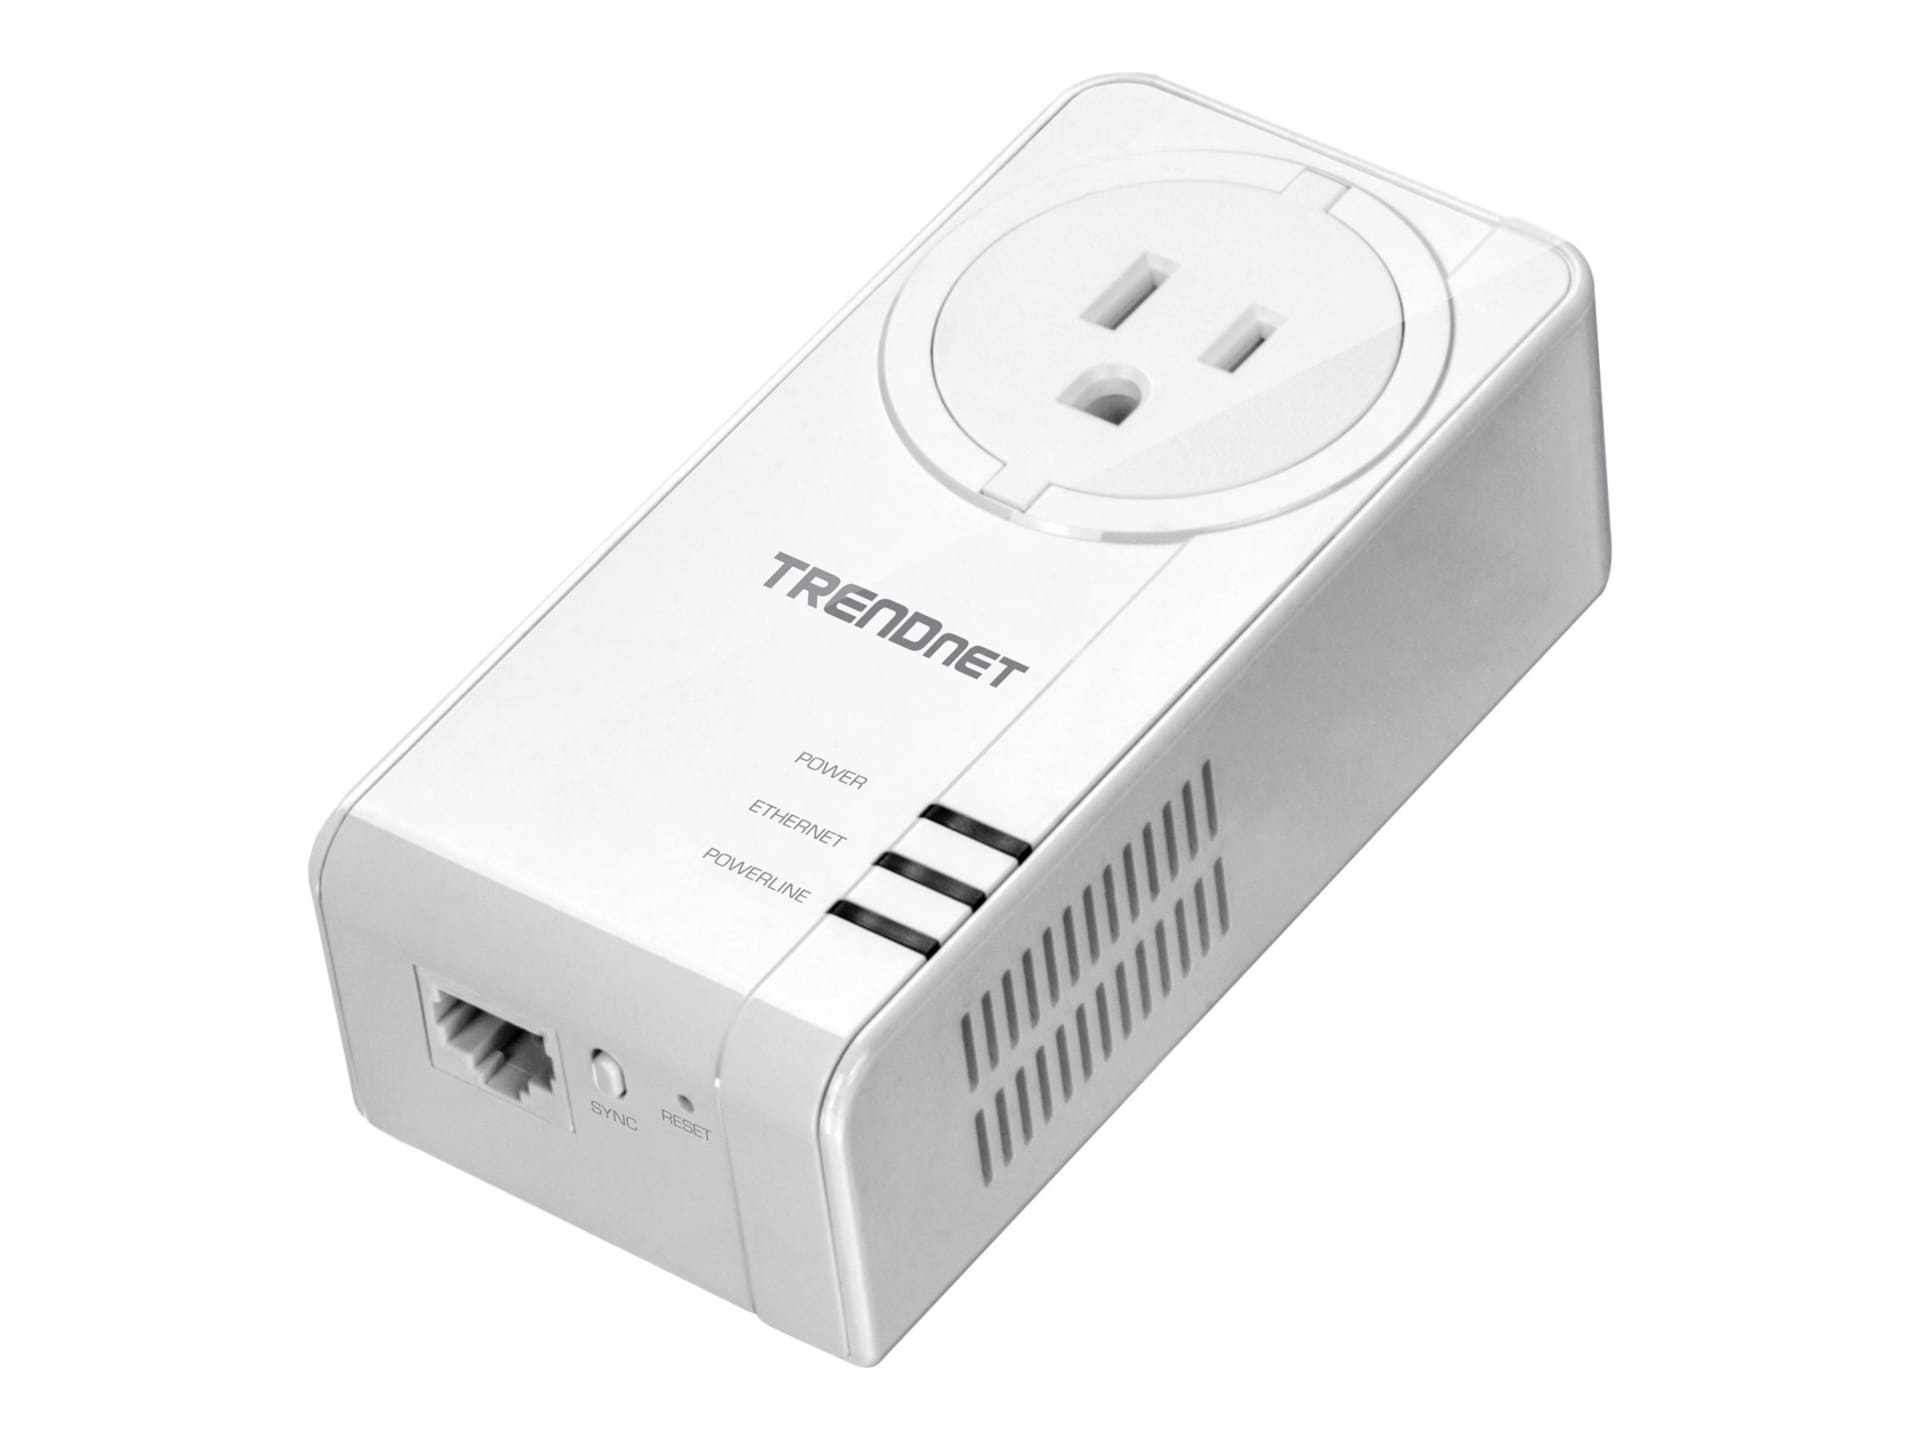 TRENDnet Powerline 1300 AV2 Adapter With Built-in Outlet Adapter Kit, Includes 2 x TPL-423E Adapters, IEEE 1905.1 & IEEE